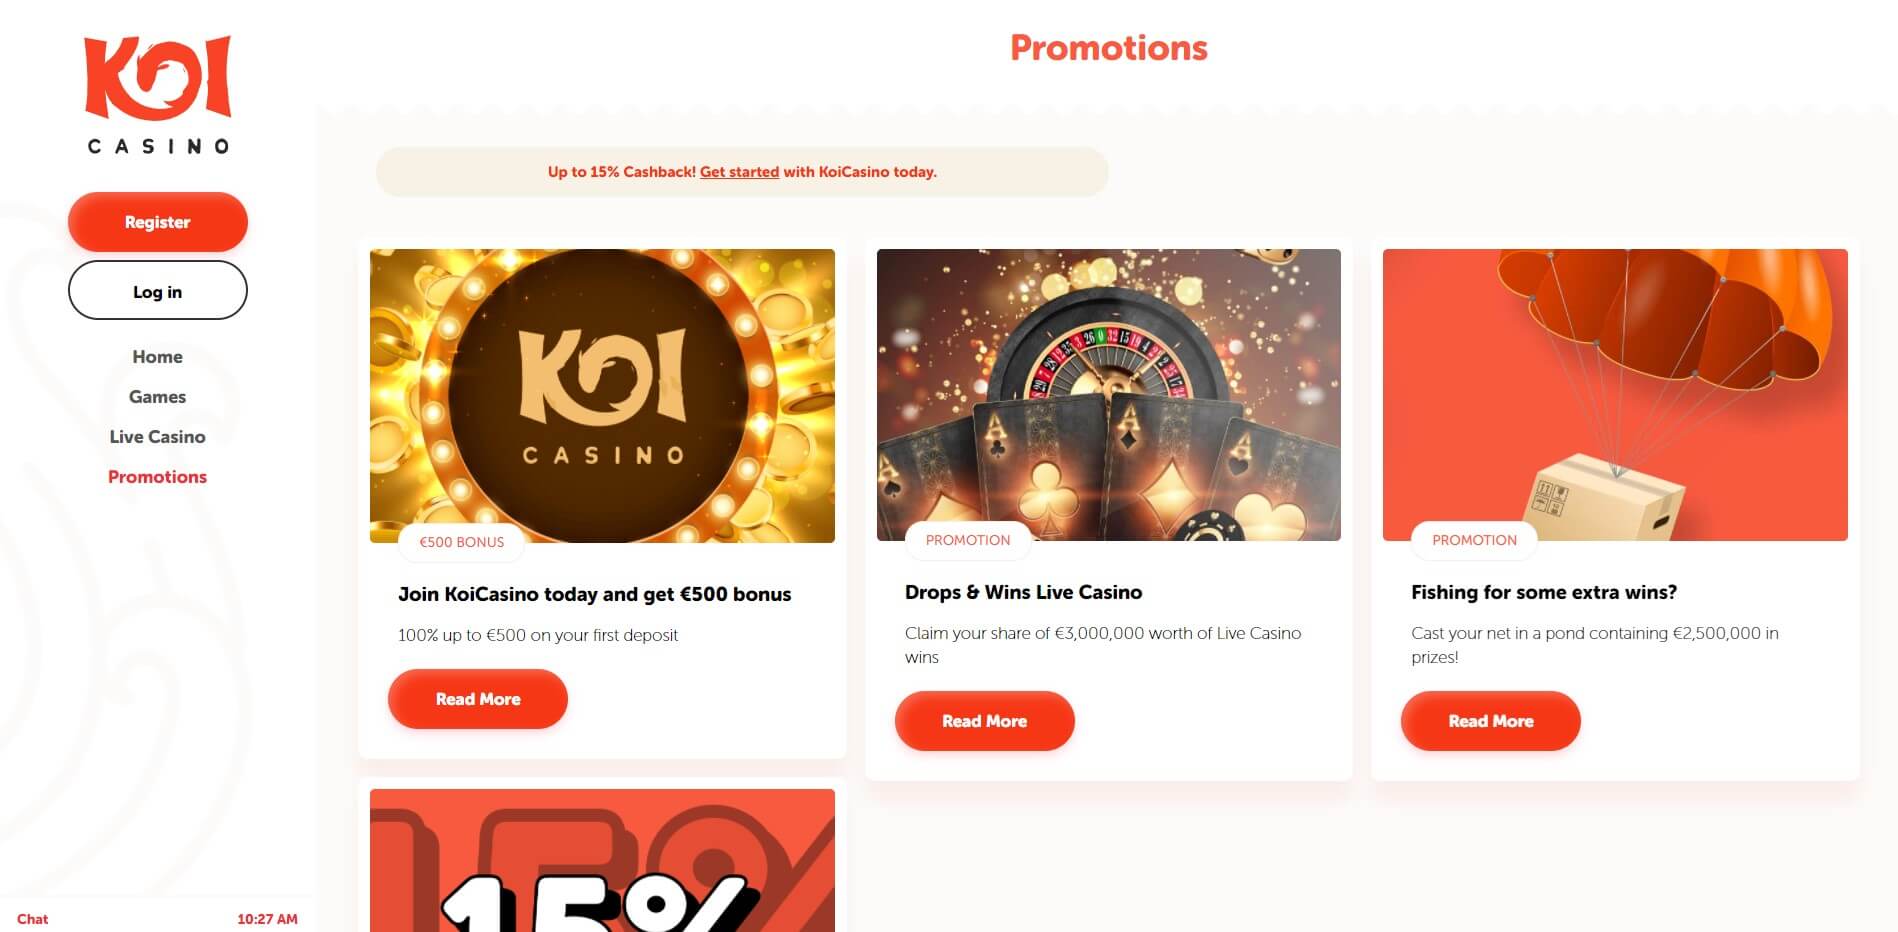 Promotions at Koi Casino